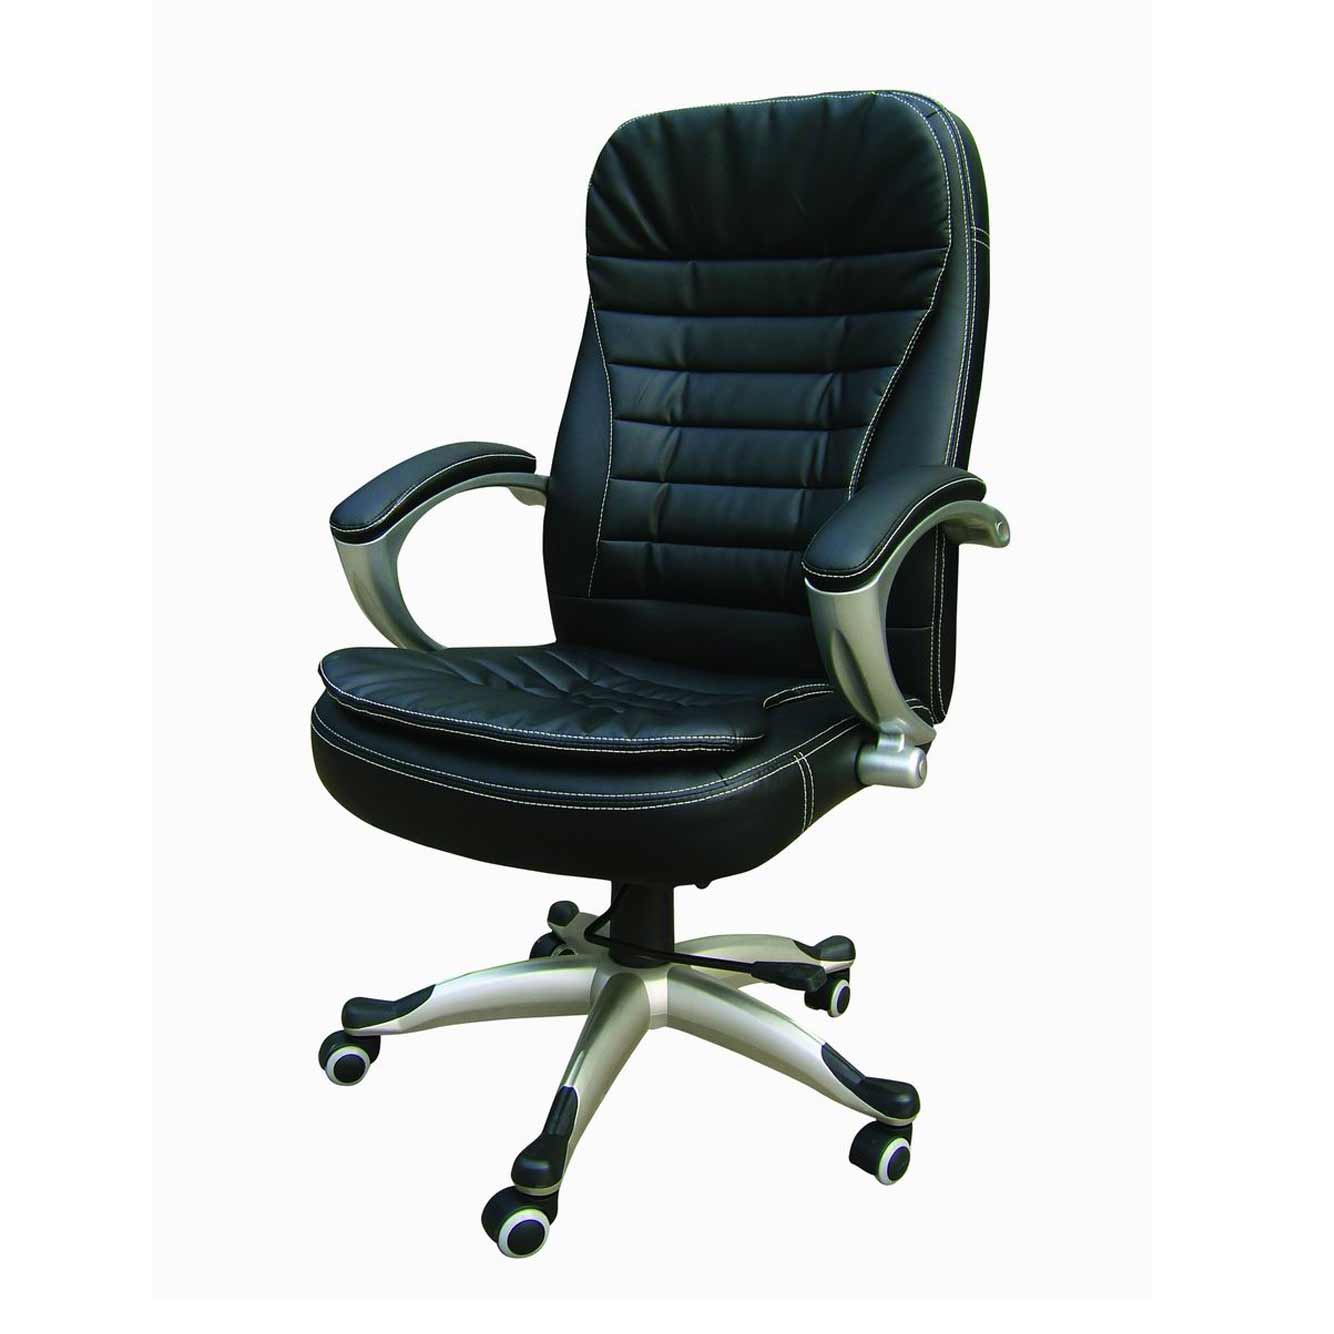 ergonomic office chair with lumbar support